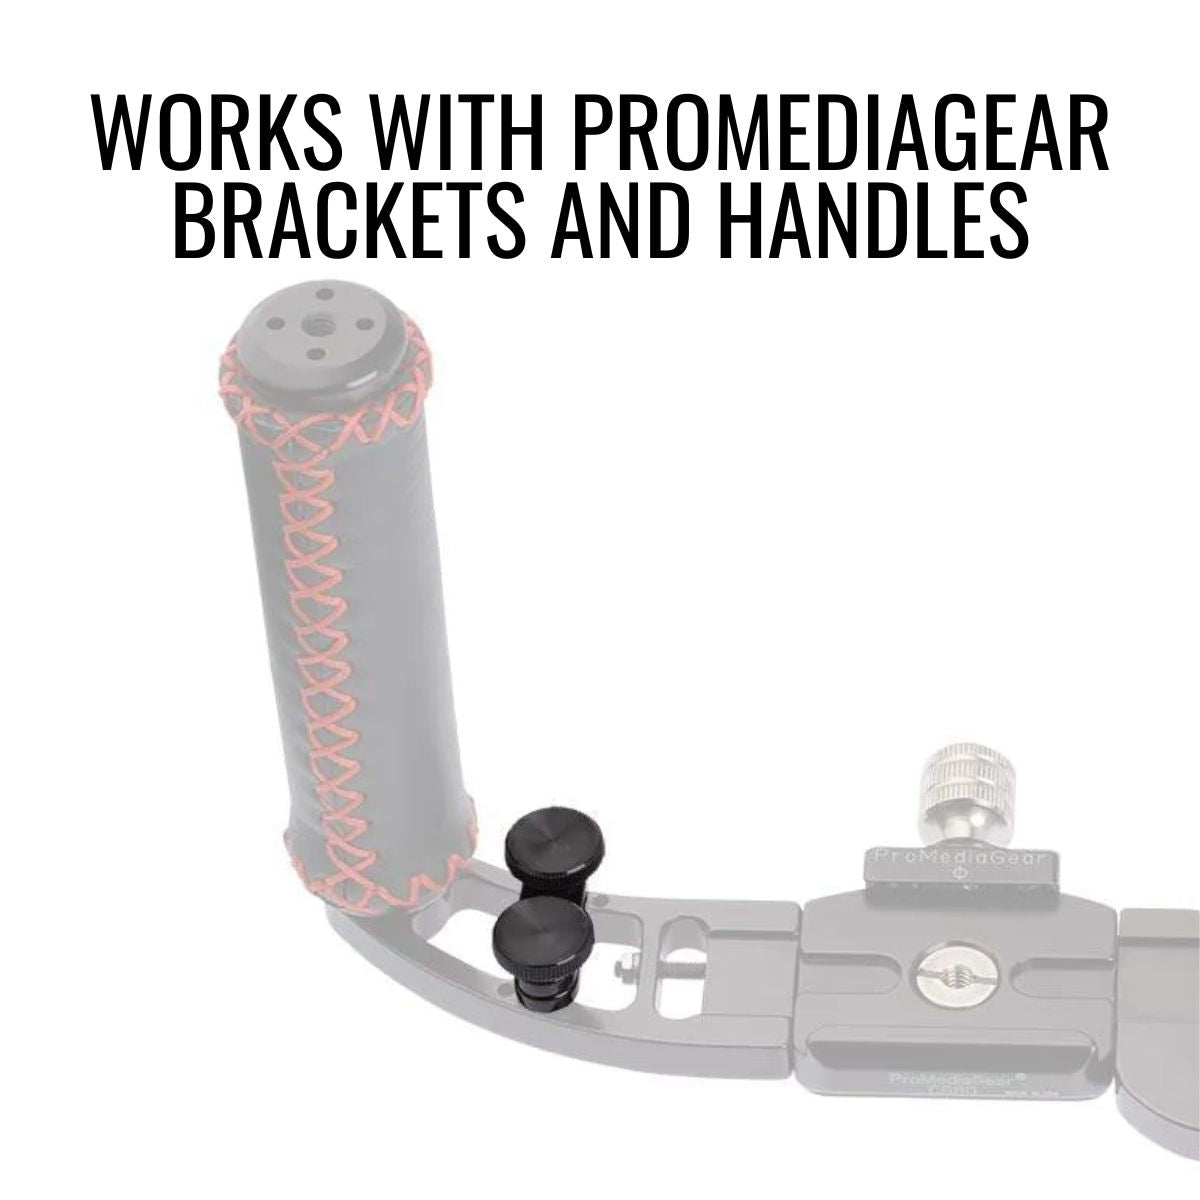 For ProMediaGear brackets and handles